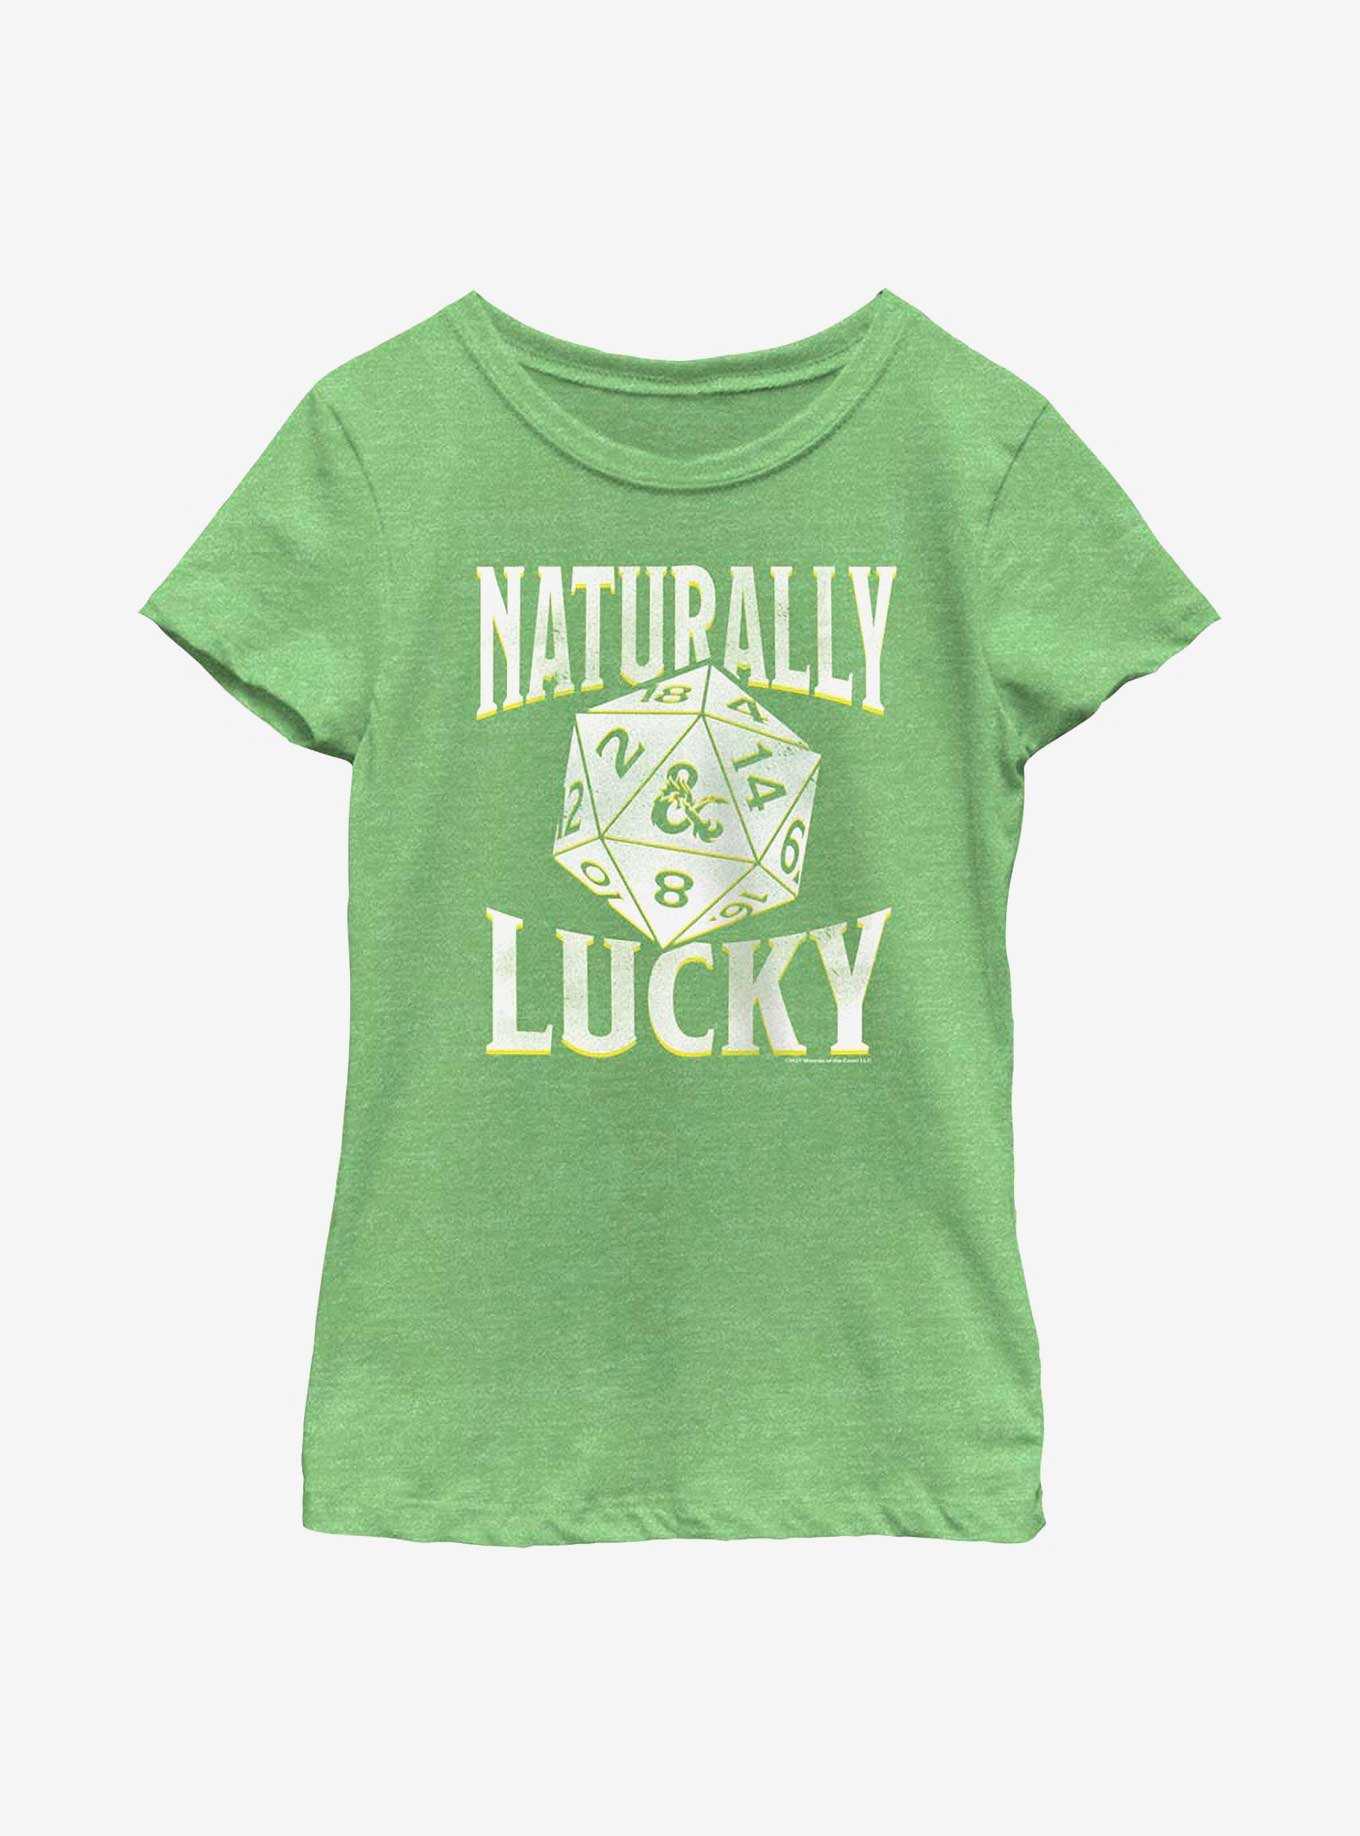 Dungeons & Dragons Naturally Lucky Youth Girls T-Shirt, , hi-res